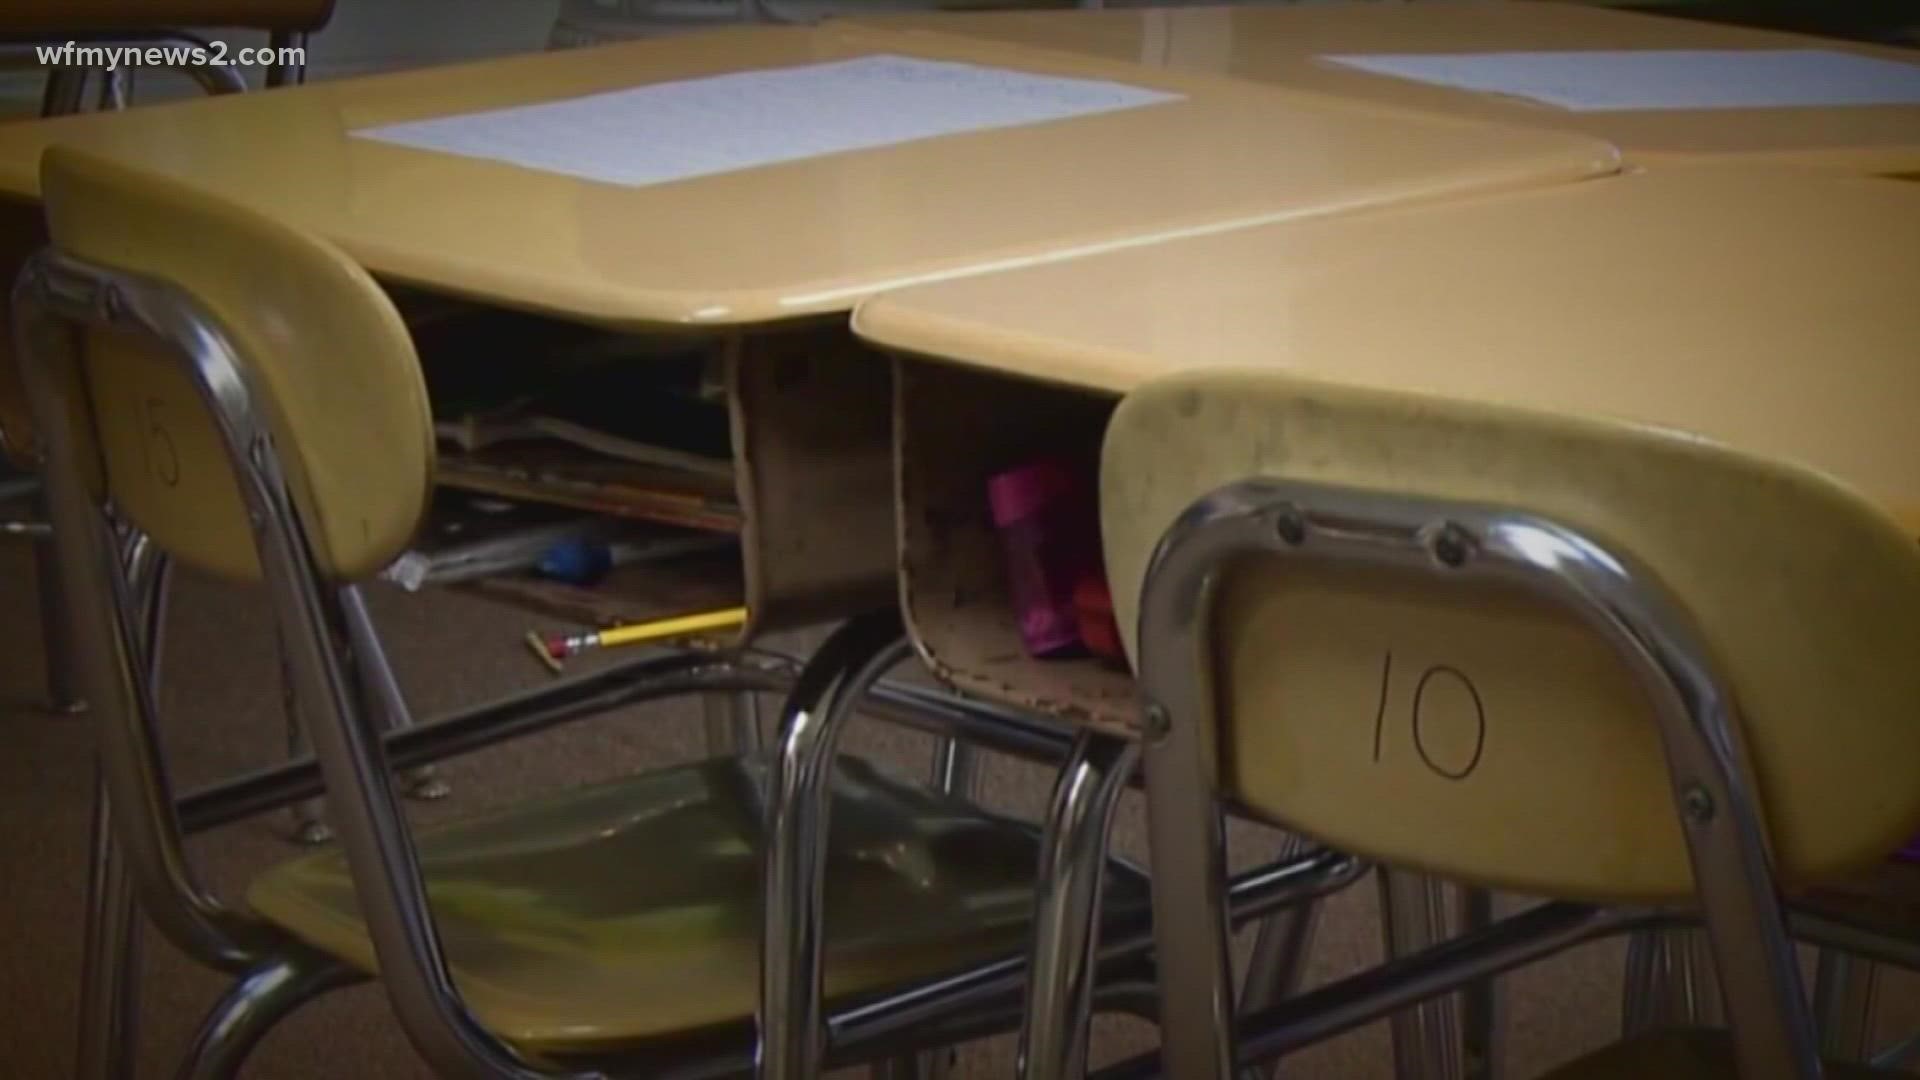 School leaders are looking into additional sign-on bonuses for specific high-need roles.